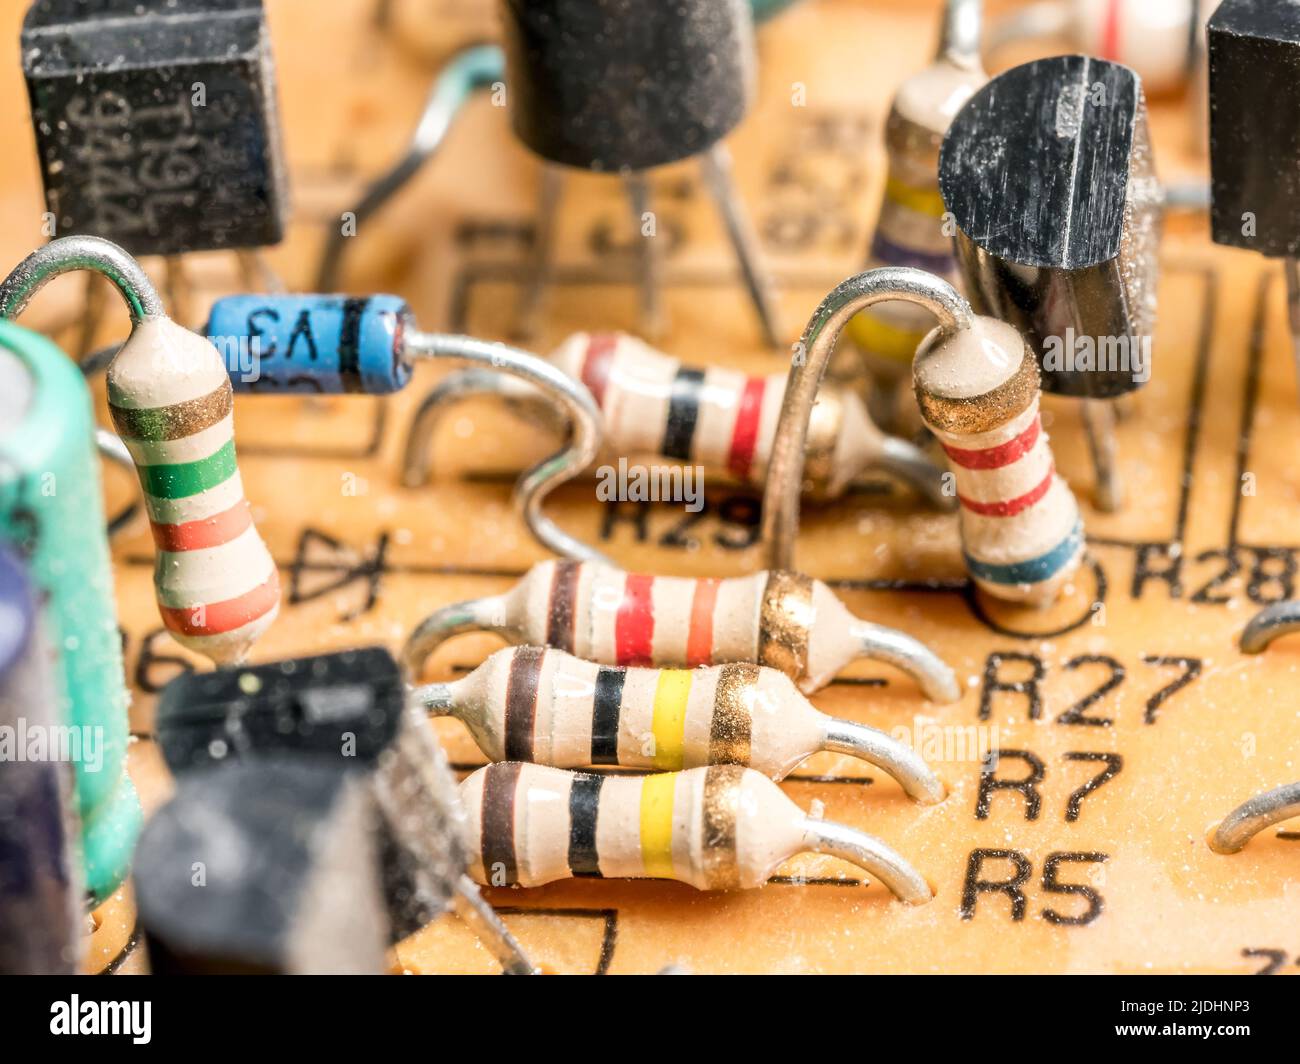 Closeup of electronic componets embedded into PCB board Stock Photo